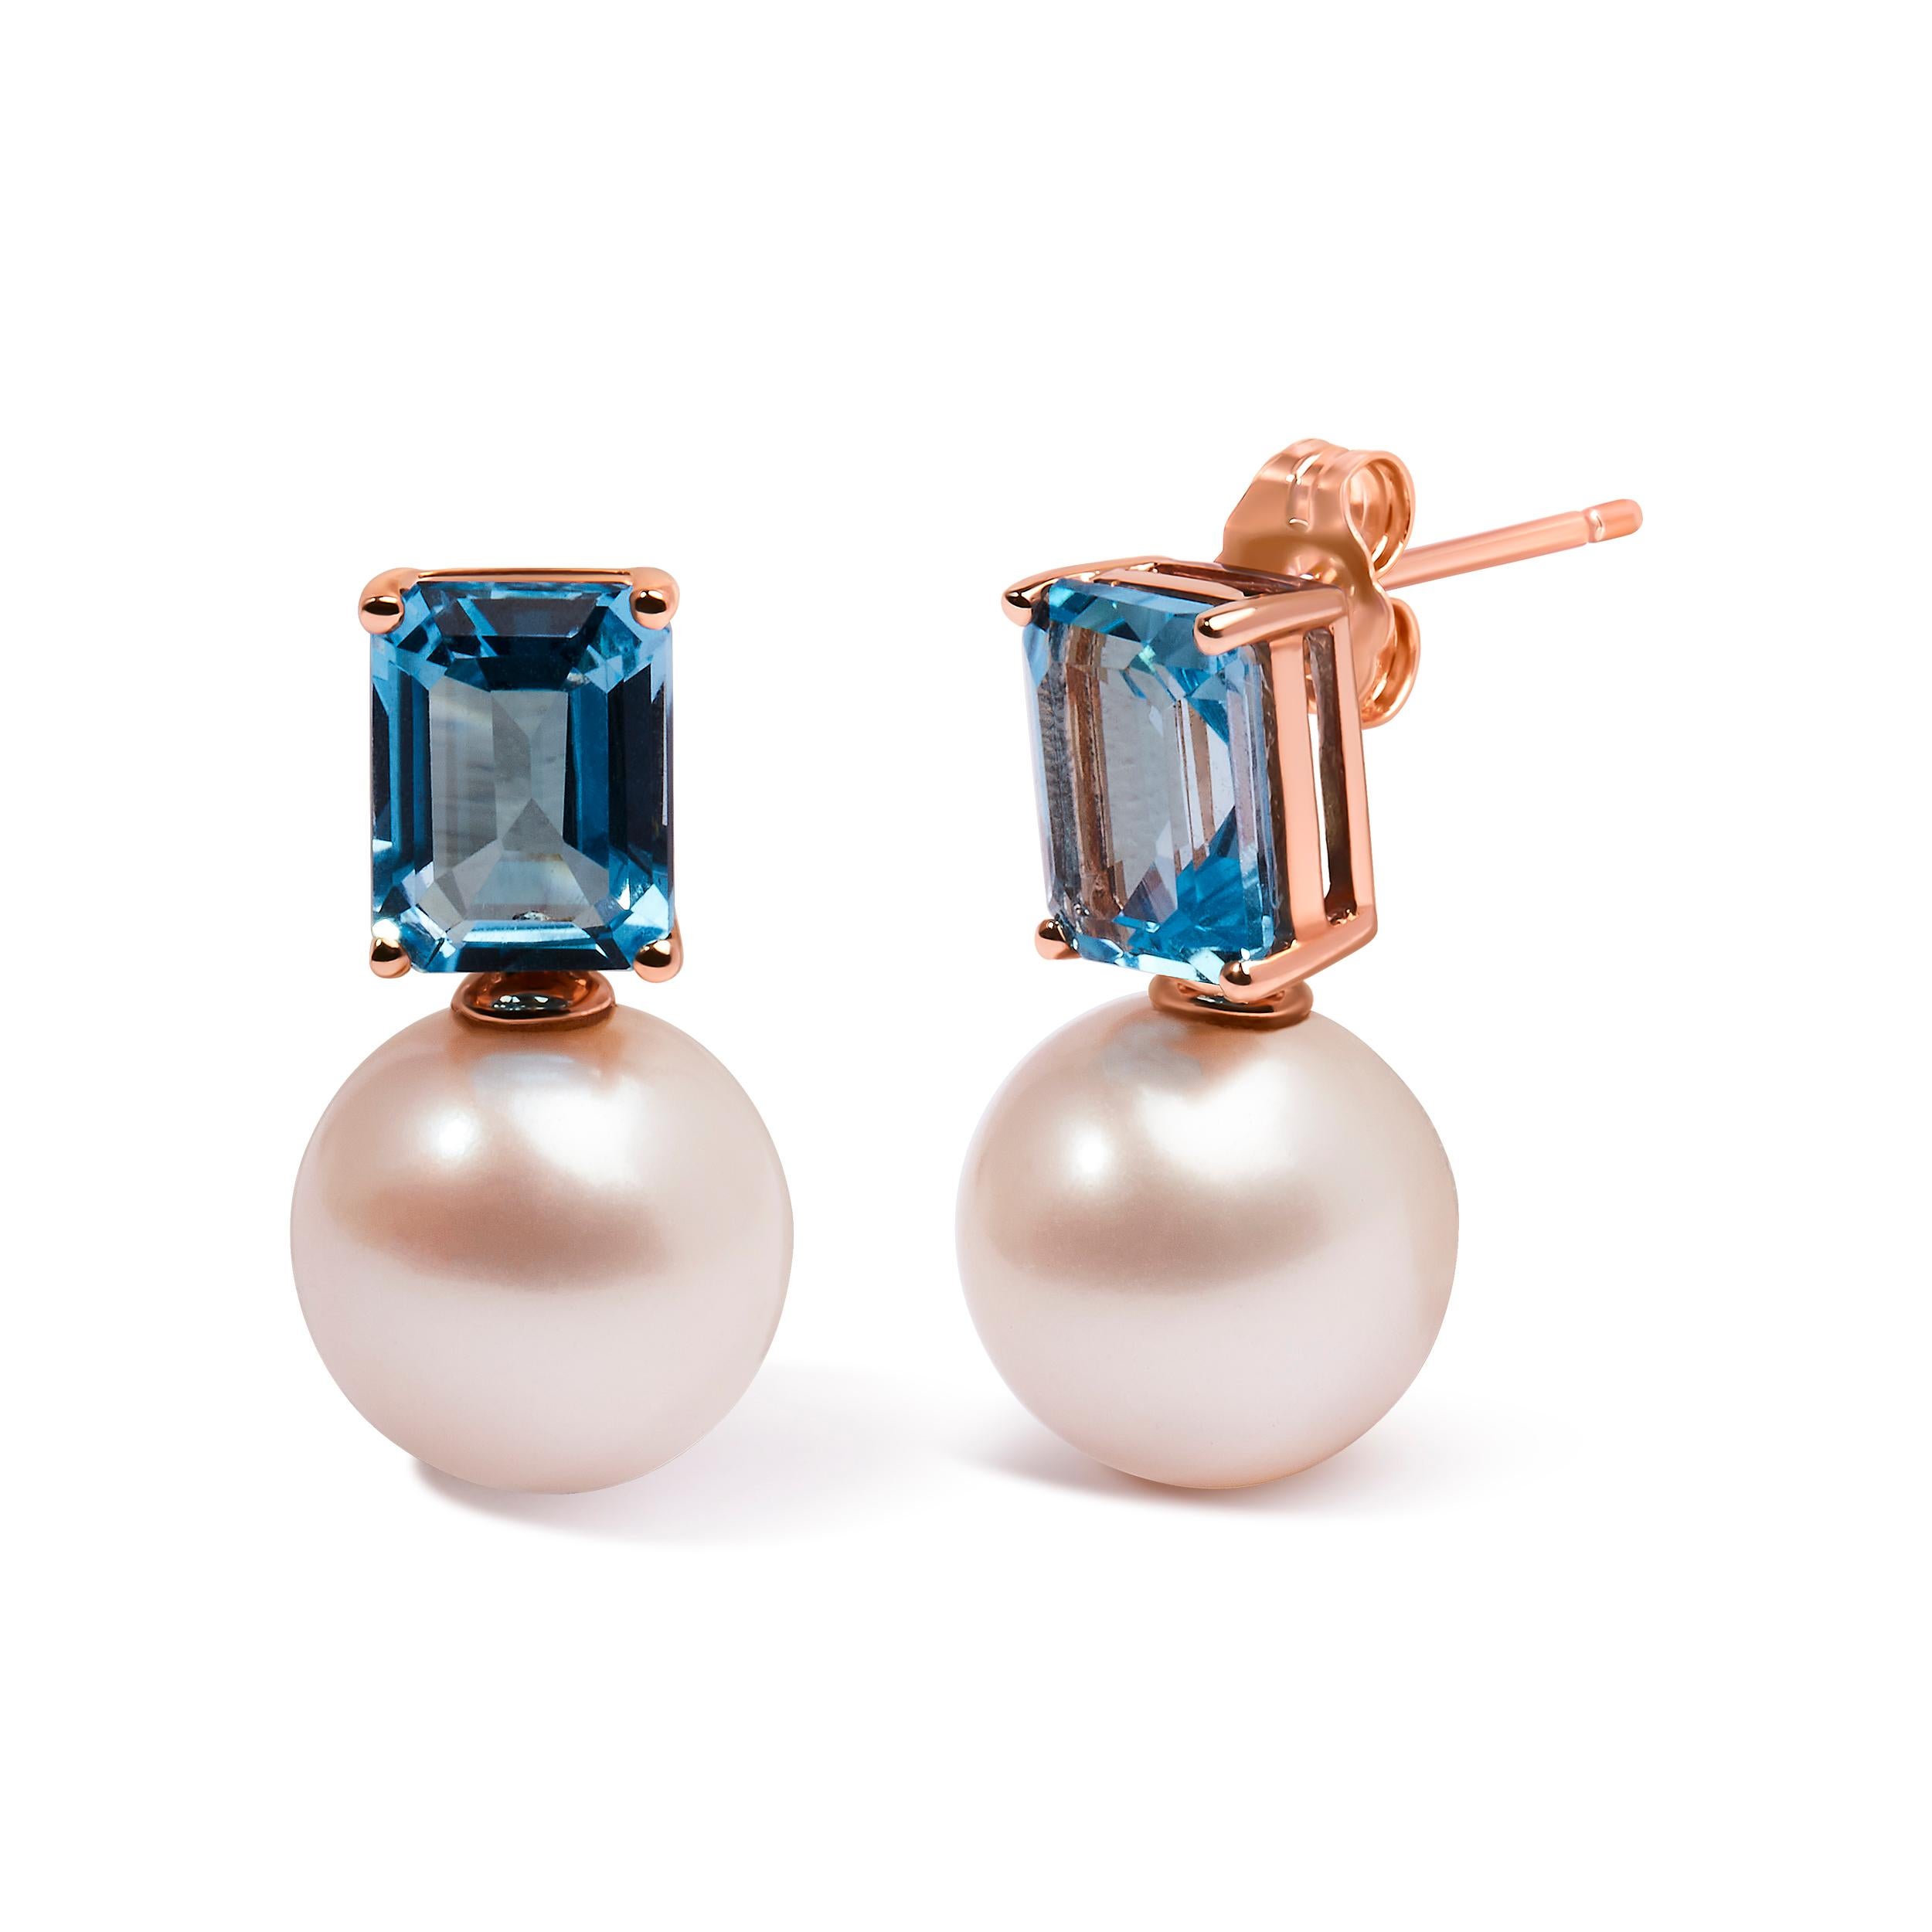 Immerse yourself in a world of refined elegance with these captivating earrings. Crafted from the blush beauty of 14K rose gold, they harmoniously unite the ethereal charm of freshwater-cultured pearls with the alluring allure of octagon-cut Swiss